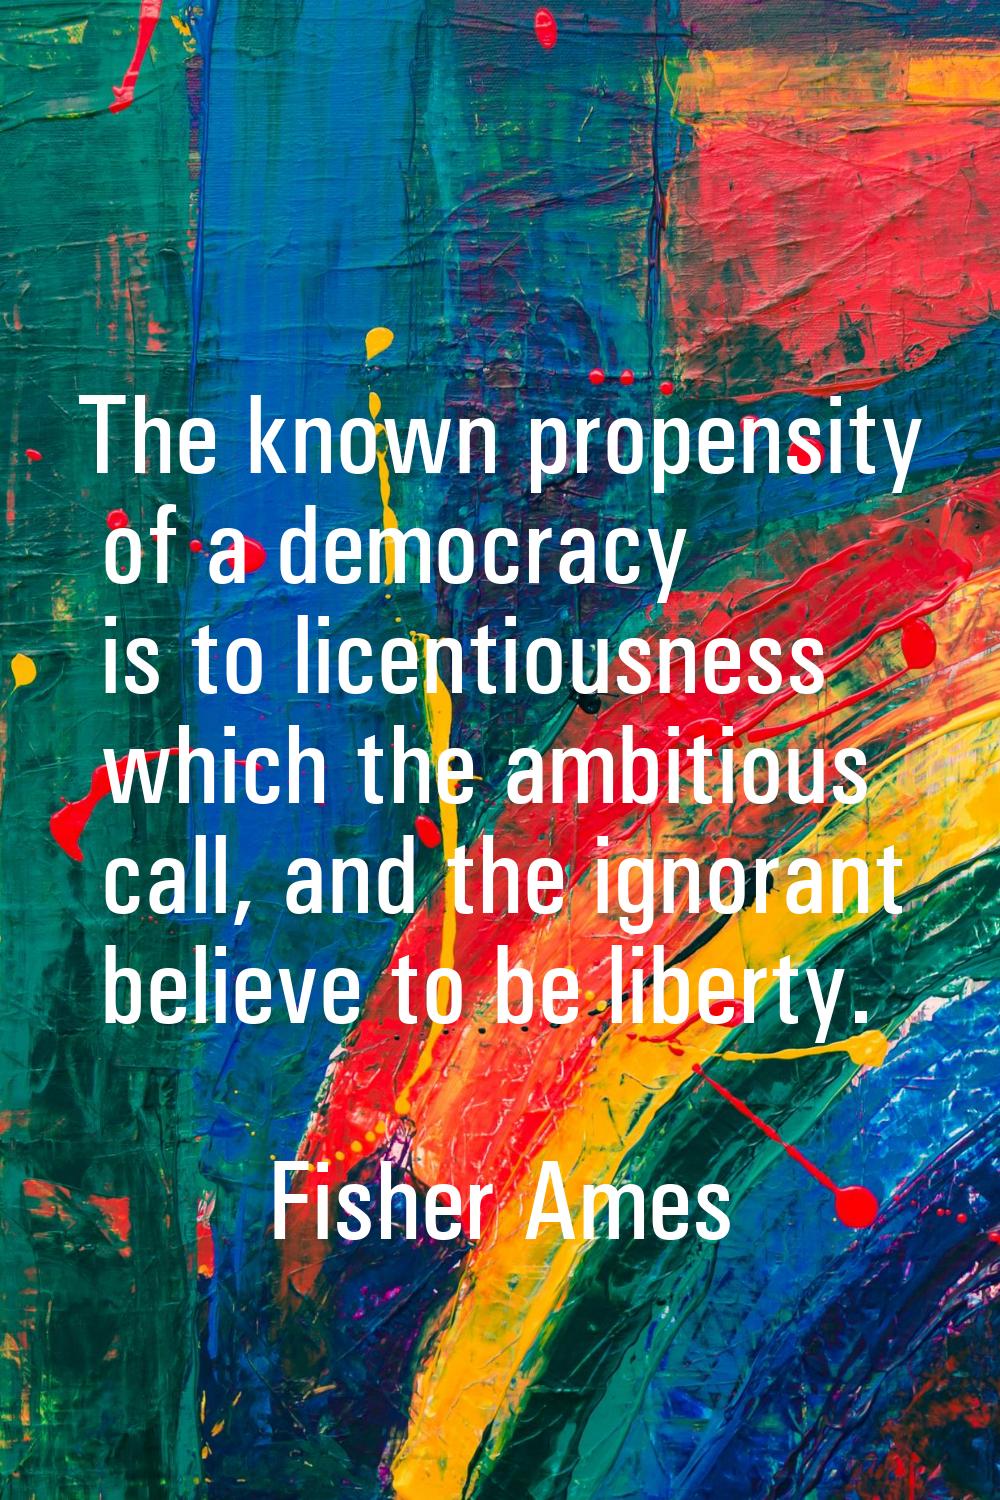 The known propensity of a democracy is to licentiousness which the ambitious call, and the ignorant